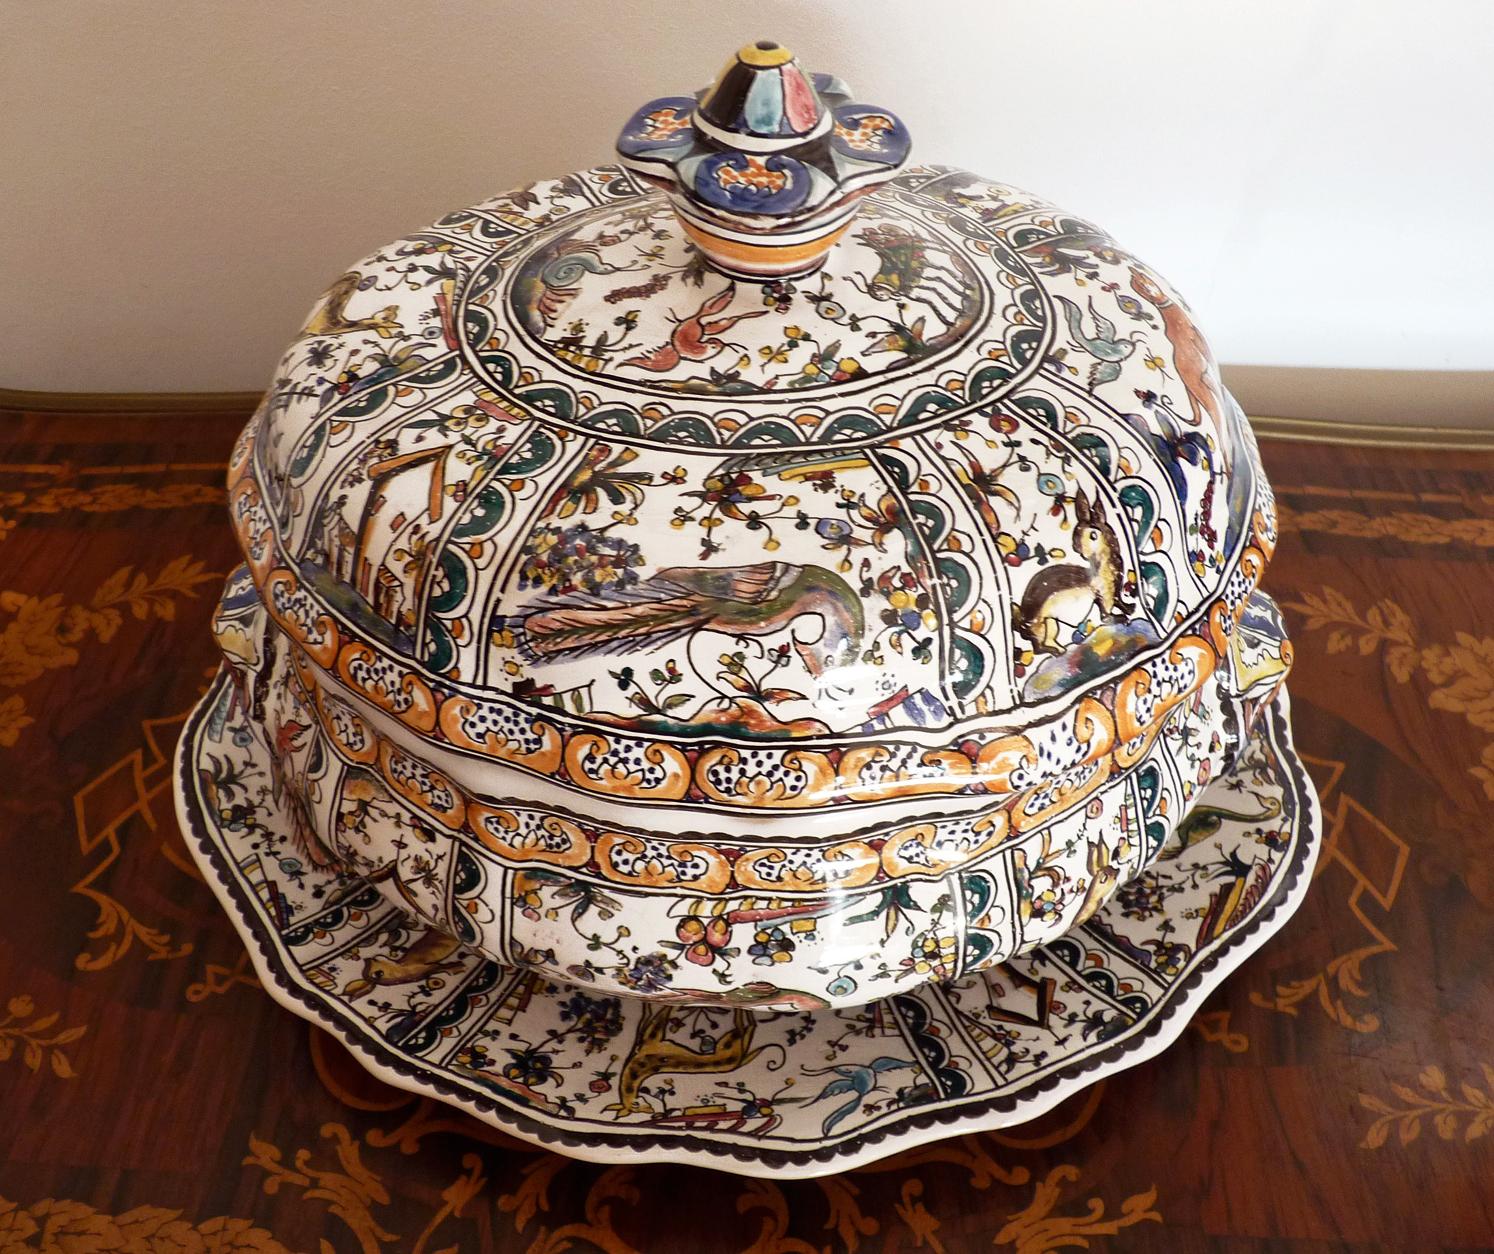 Delft polychrome Portuguese hand painted ceramic covered tureen with lid and under plate, hand painted 17th century, tin glazed faience with floral, hunting and bird motif, early 20th century, Numbered and signed.
The intricacy of the hand painted